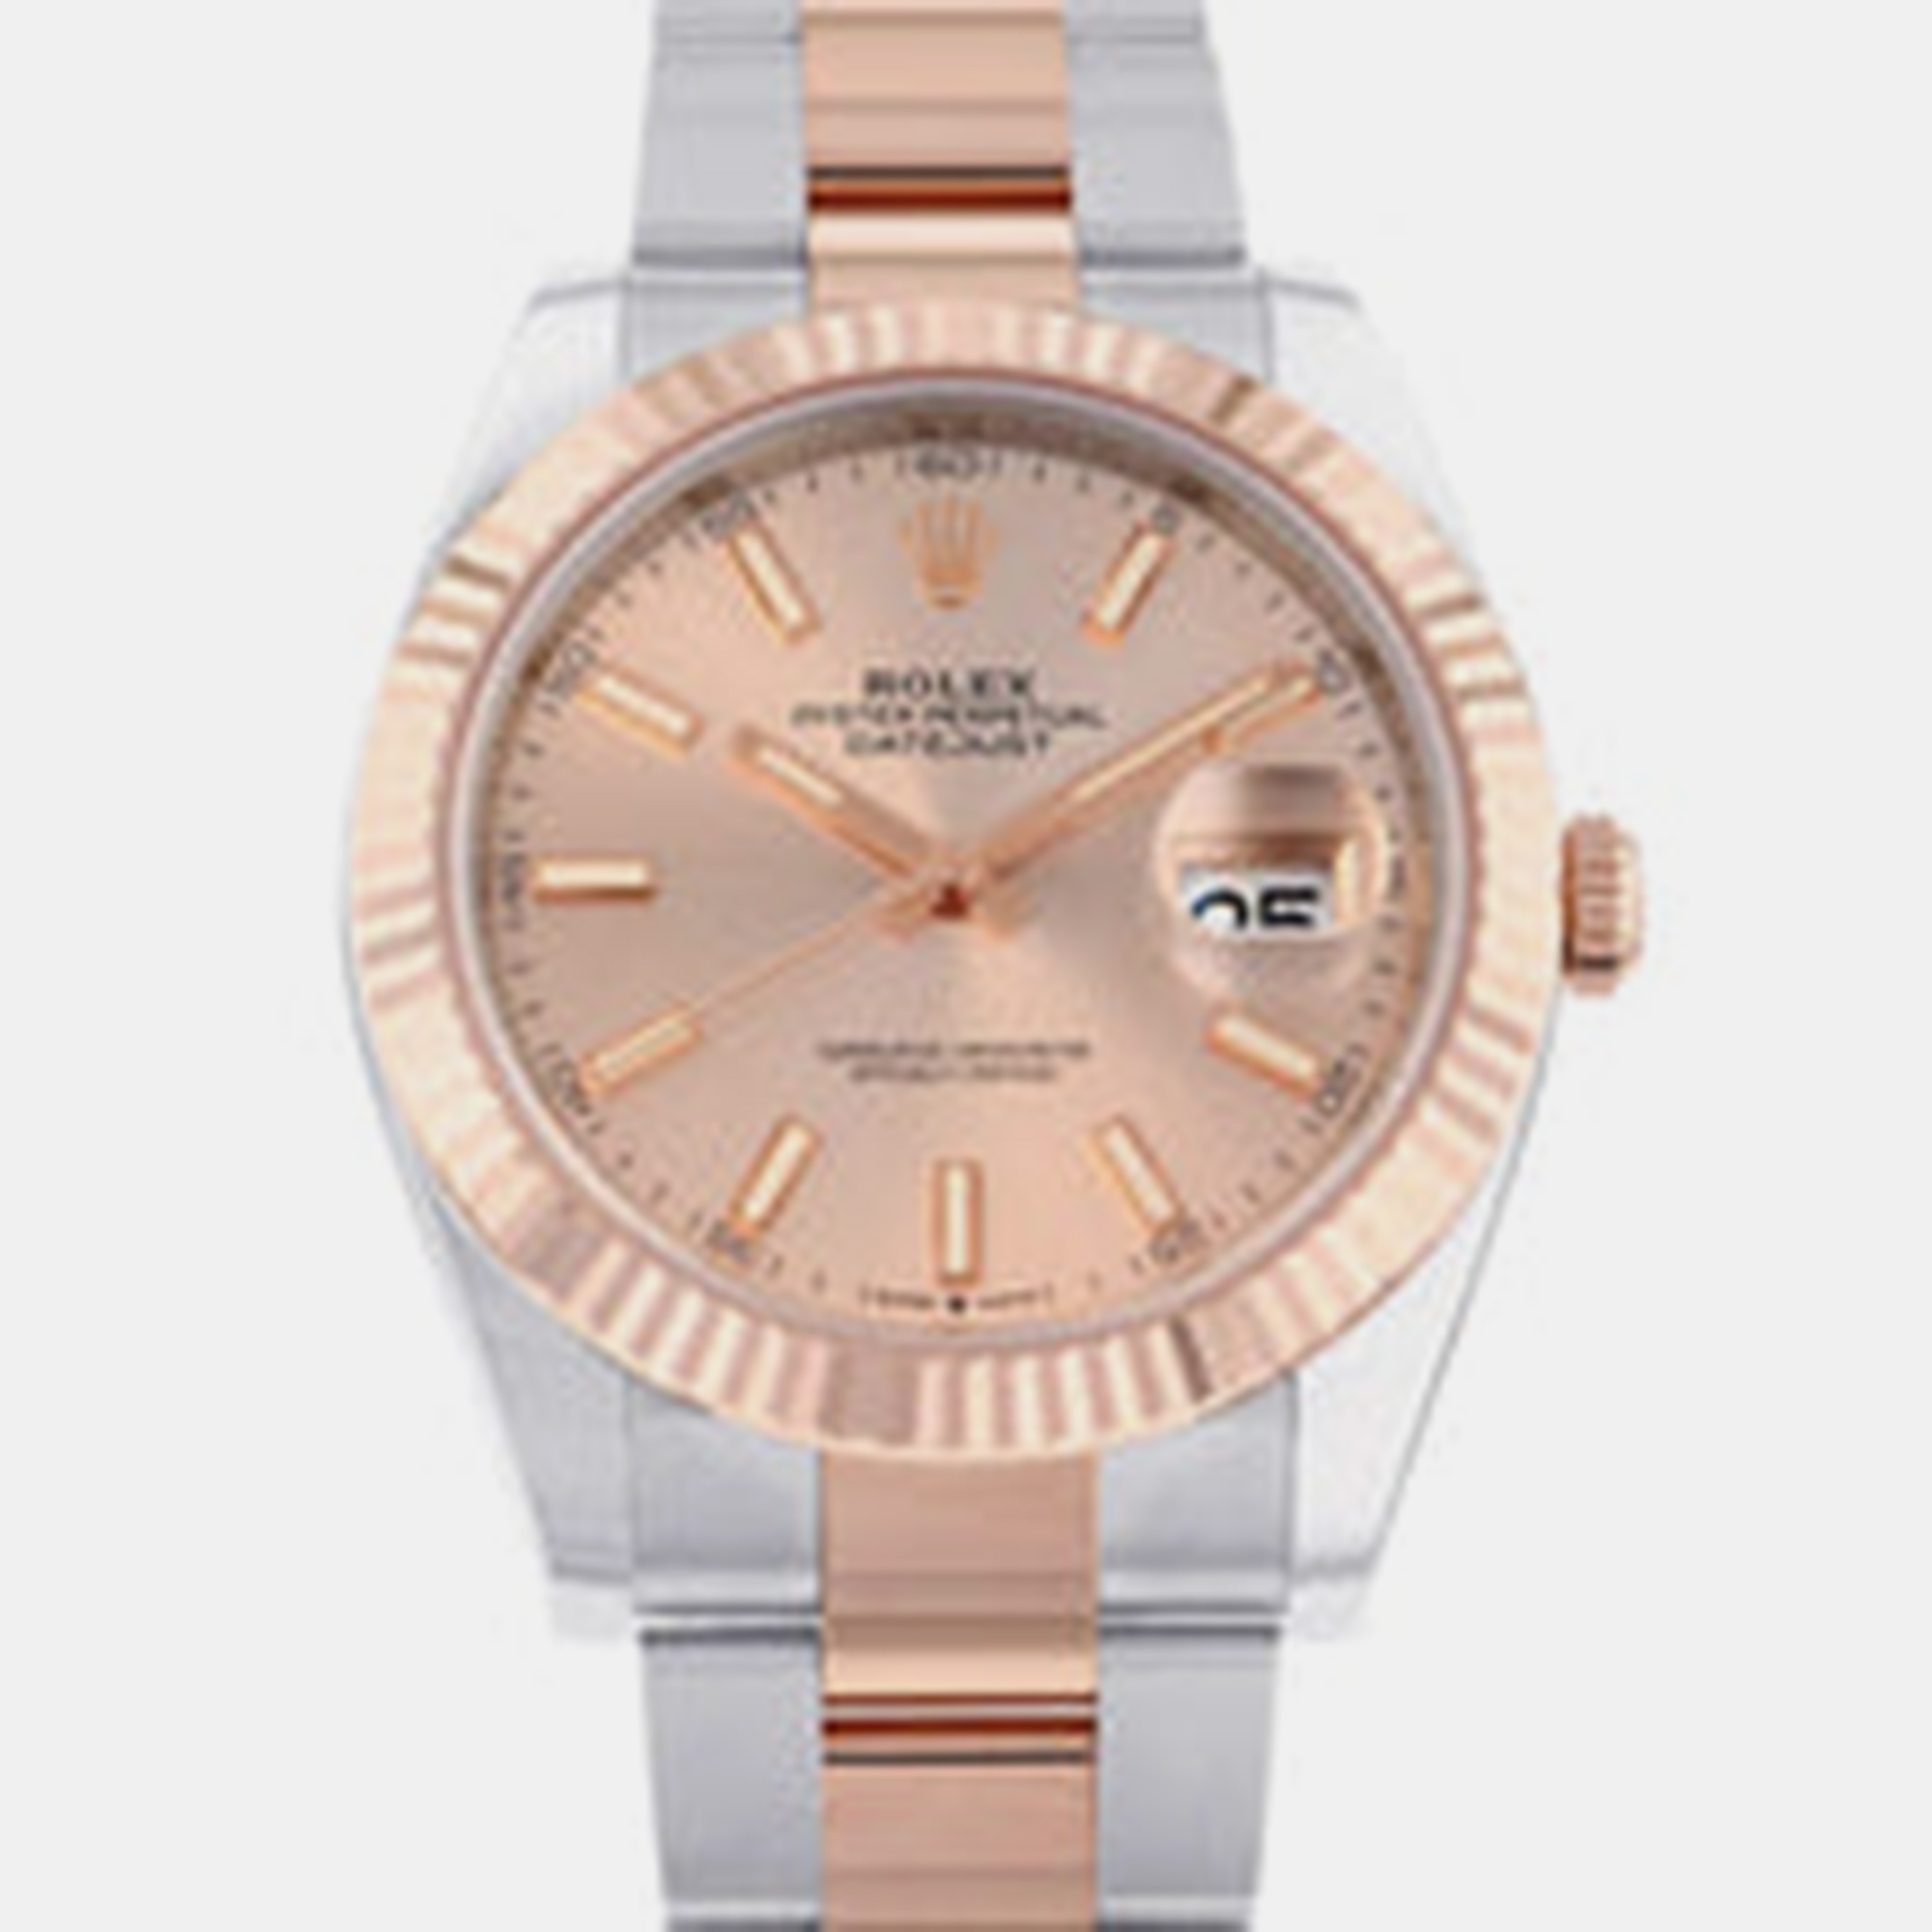 Rolex pink 18k rose gold and stainless steel datejust 126331 automatic men's wristwatch 41 mm